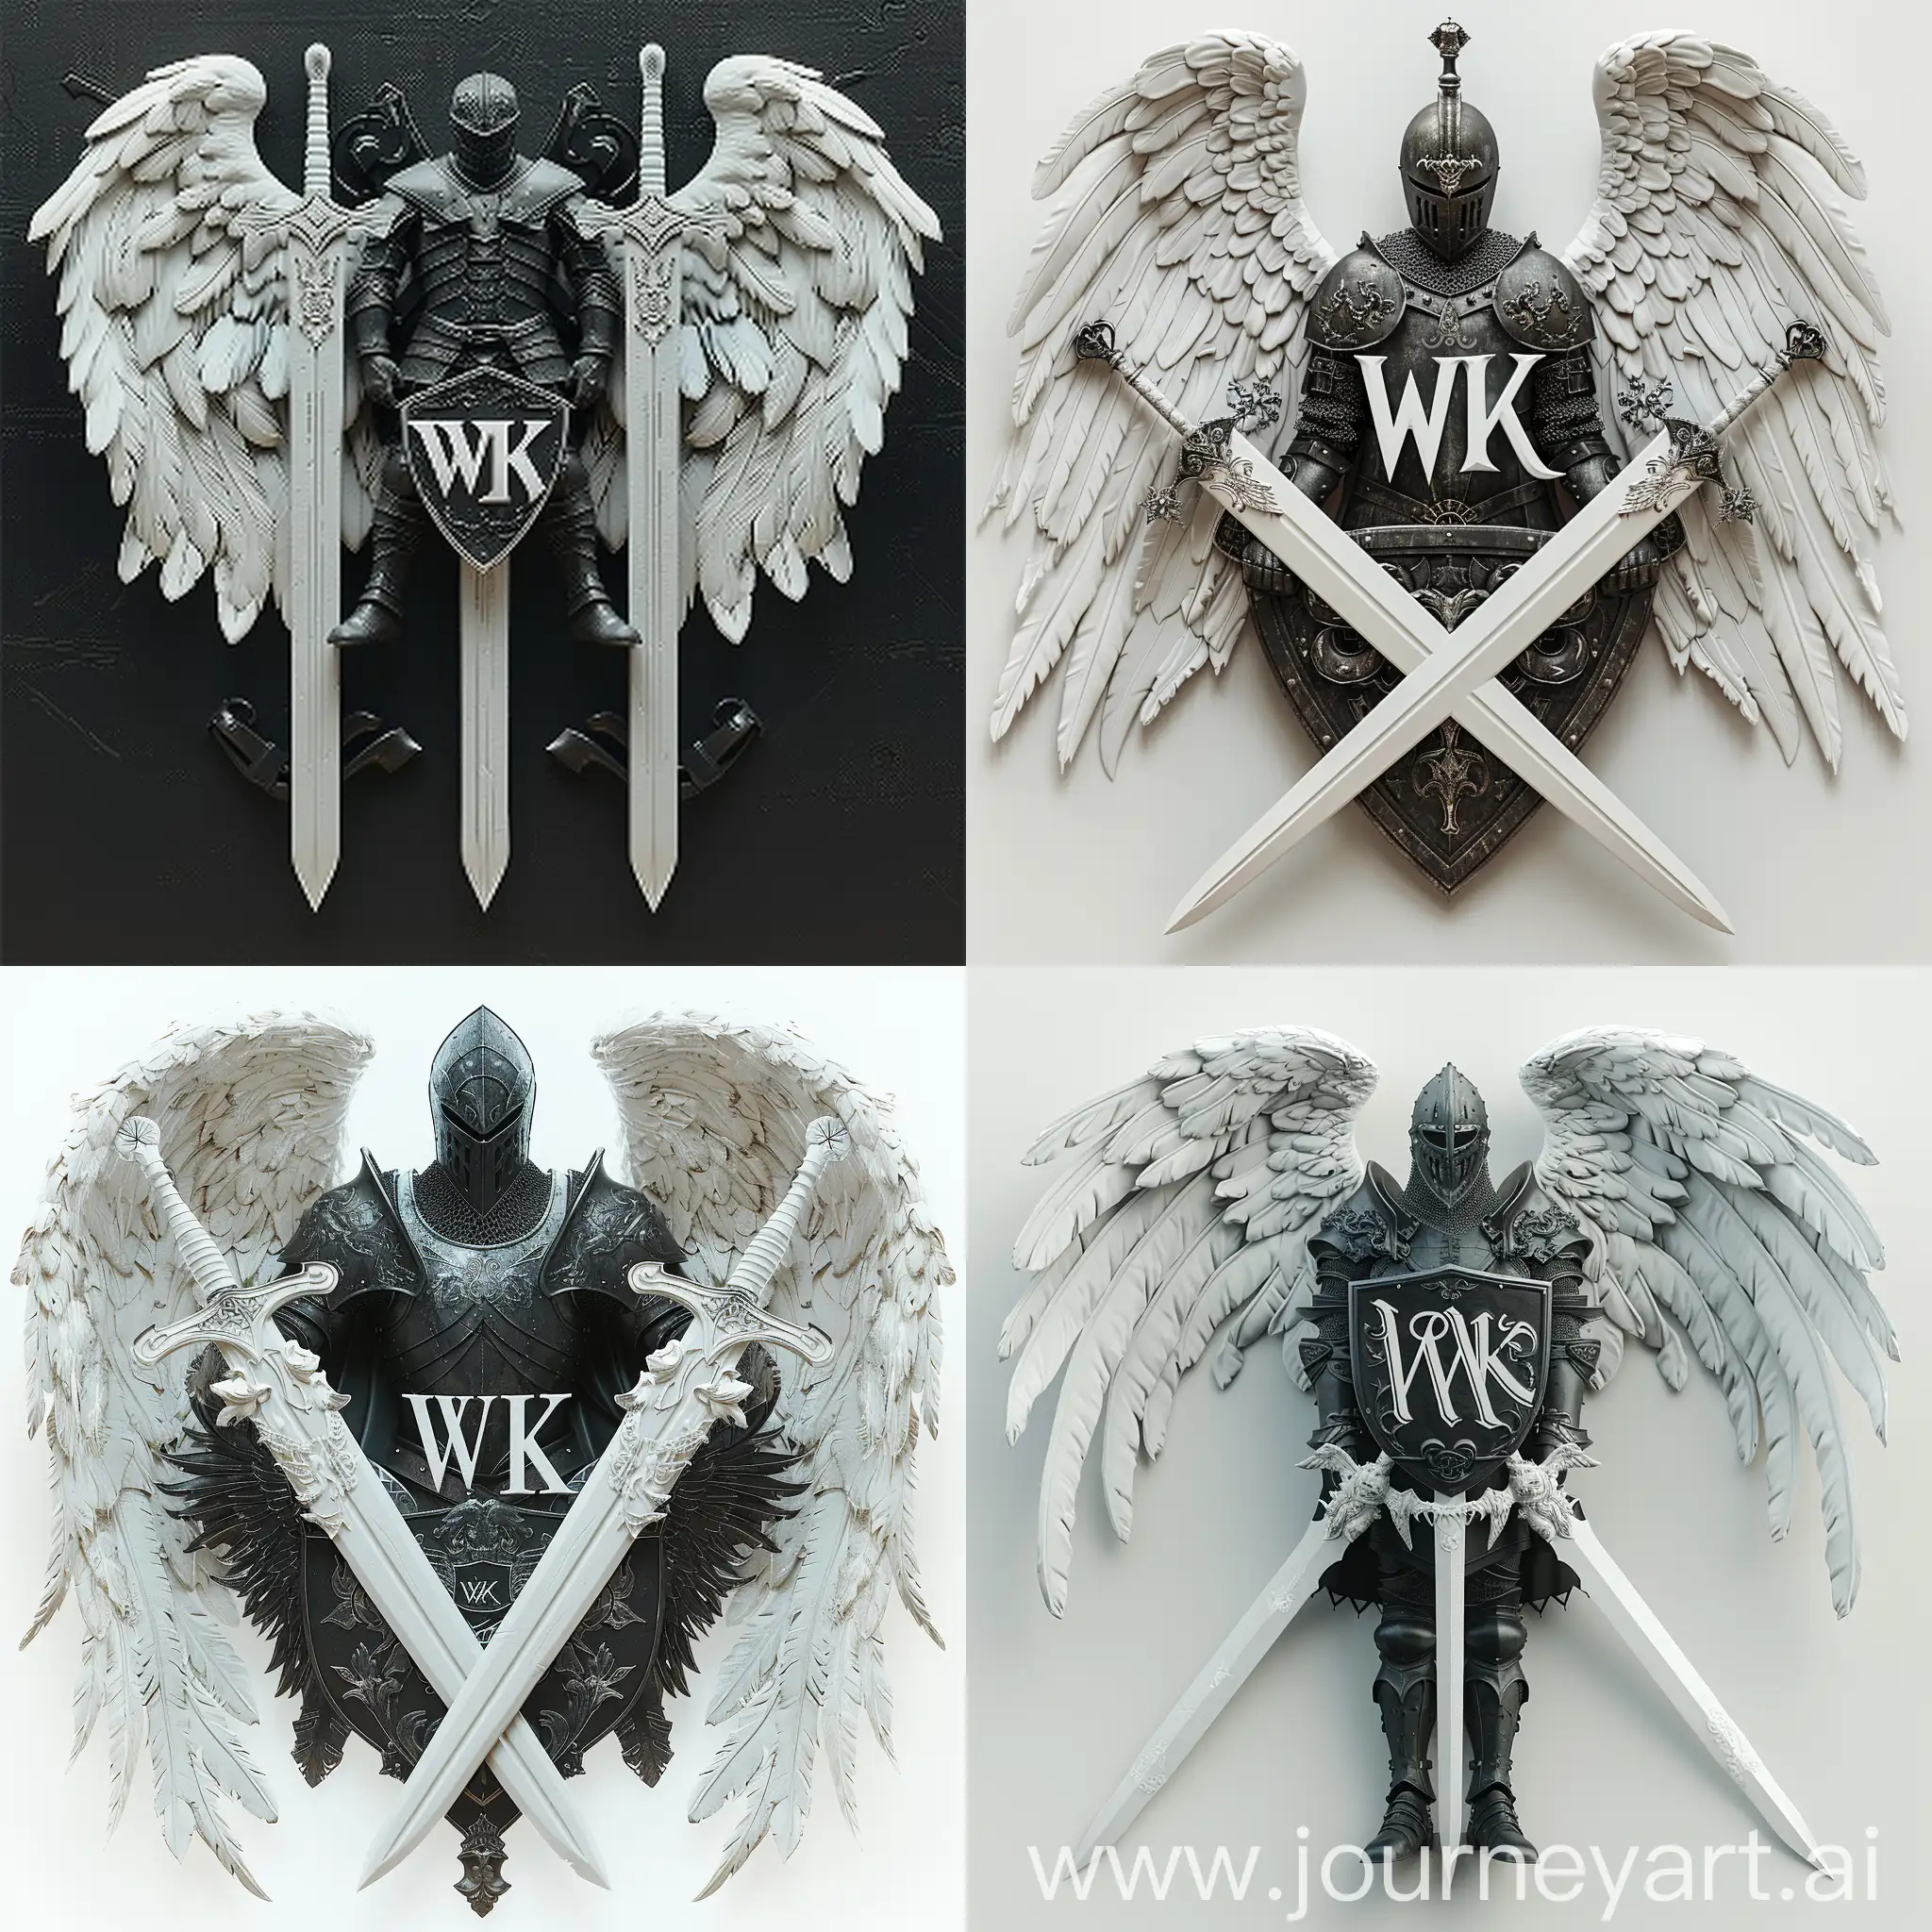 Gothic-White-Swords-and-Black-Knight-Stylized-Logo-Design-in-VRay-8K-Resolution